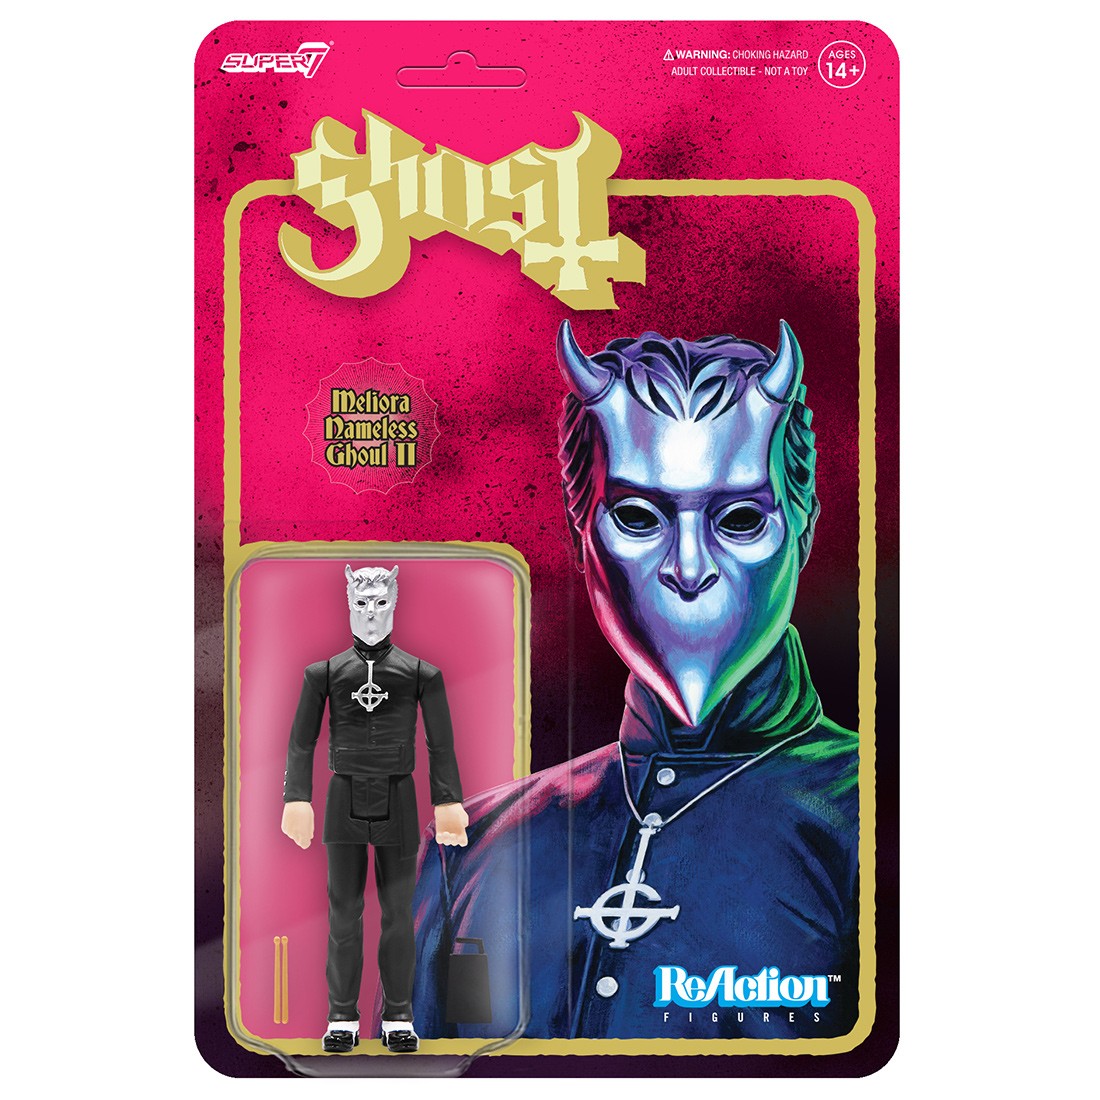 Super7 x Ghost Reaction Figure - Meliora Nameless Ghoul - Cowbell and Drumsticks (red / black)